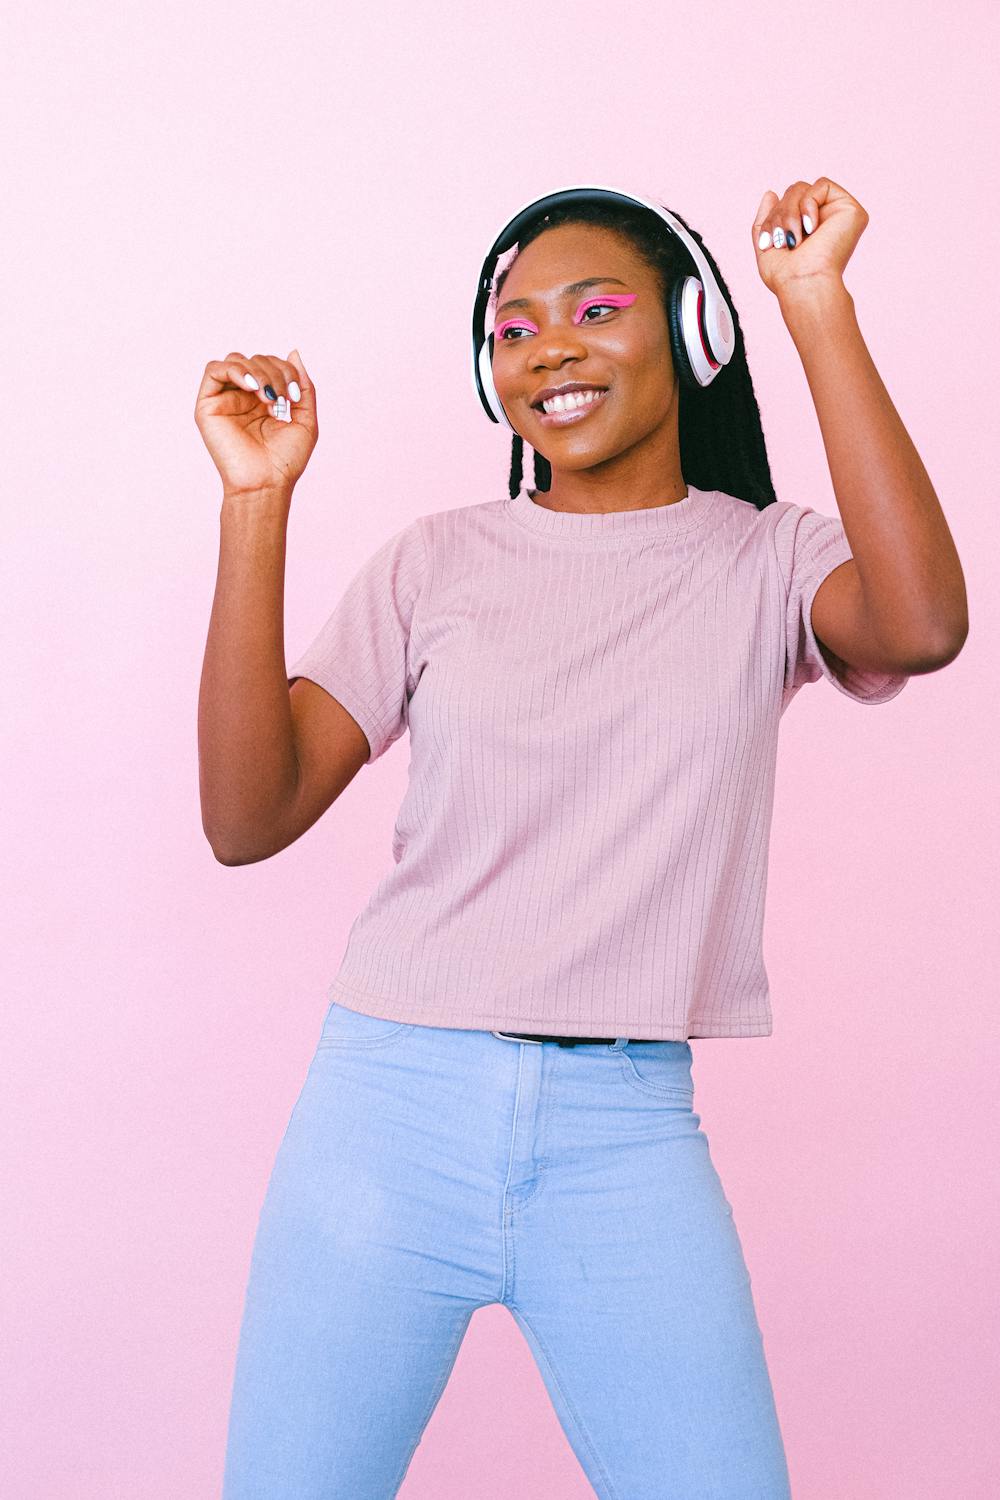 woman dancing with headphones on and a light pink backdrop